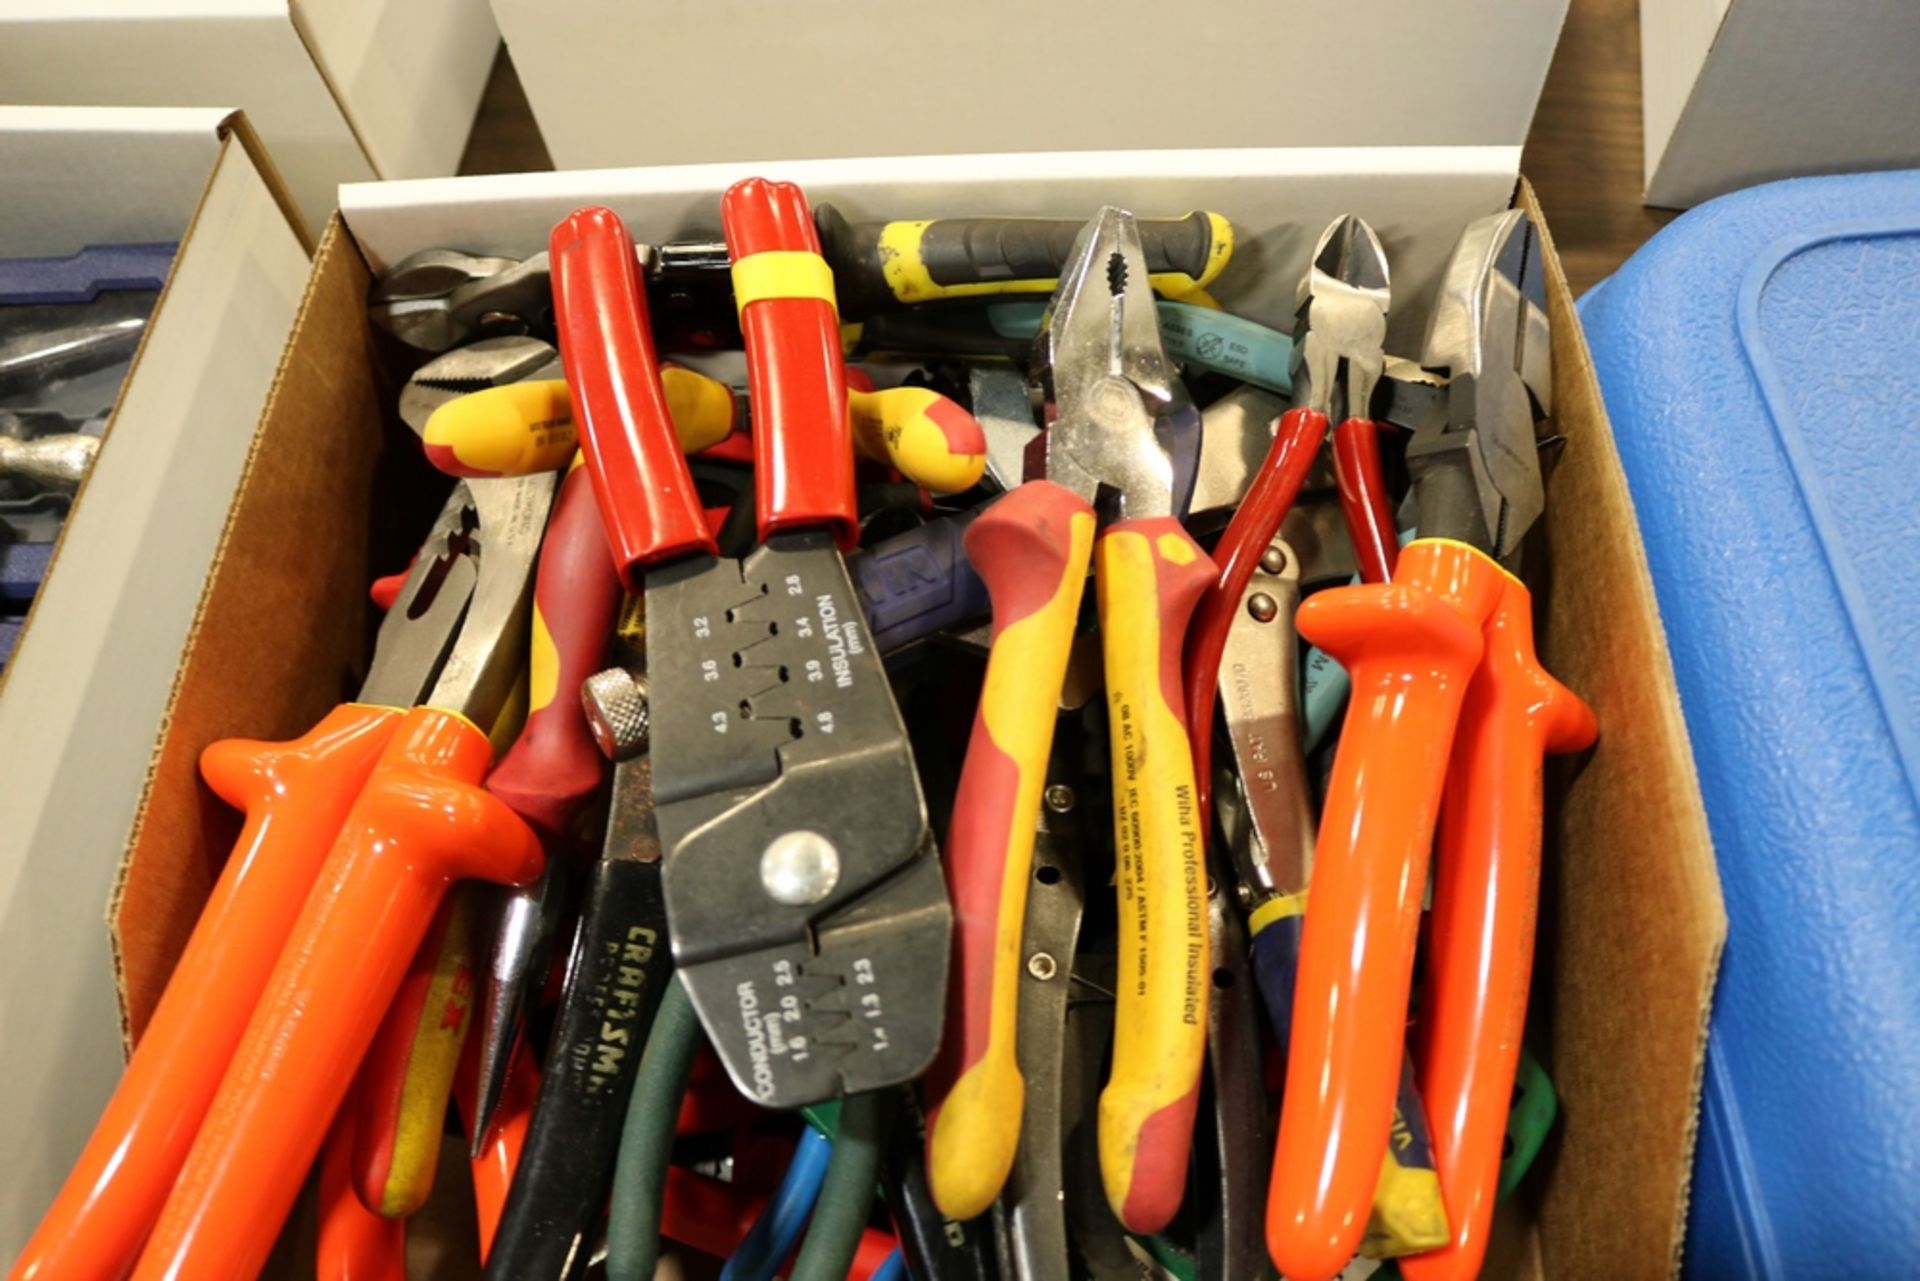 Box of Various Hand Tools Basic & Electrical - Image 2 of 3